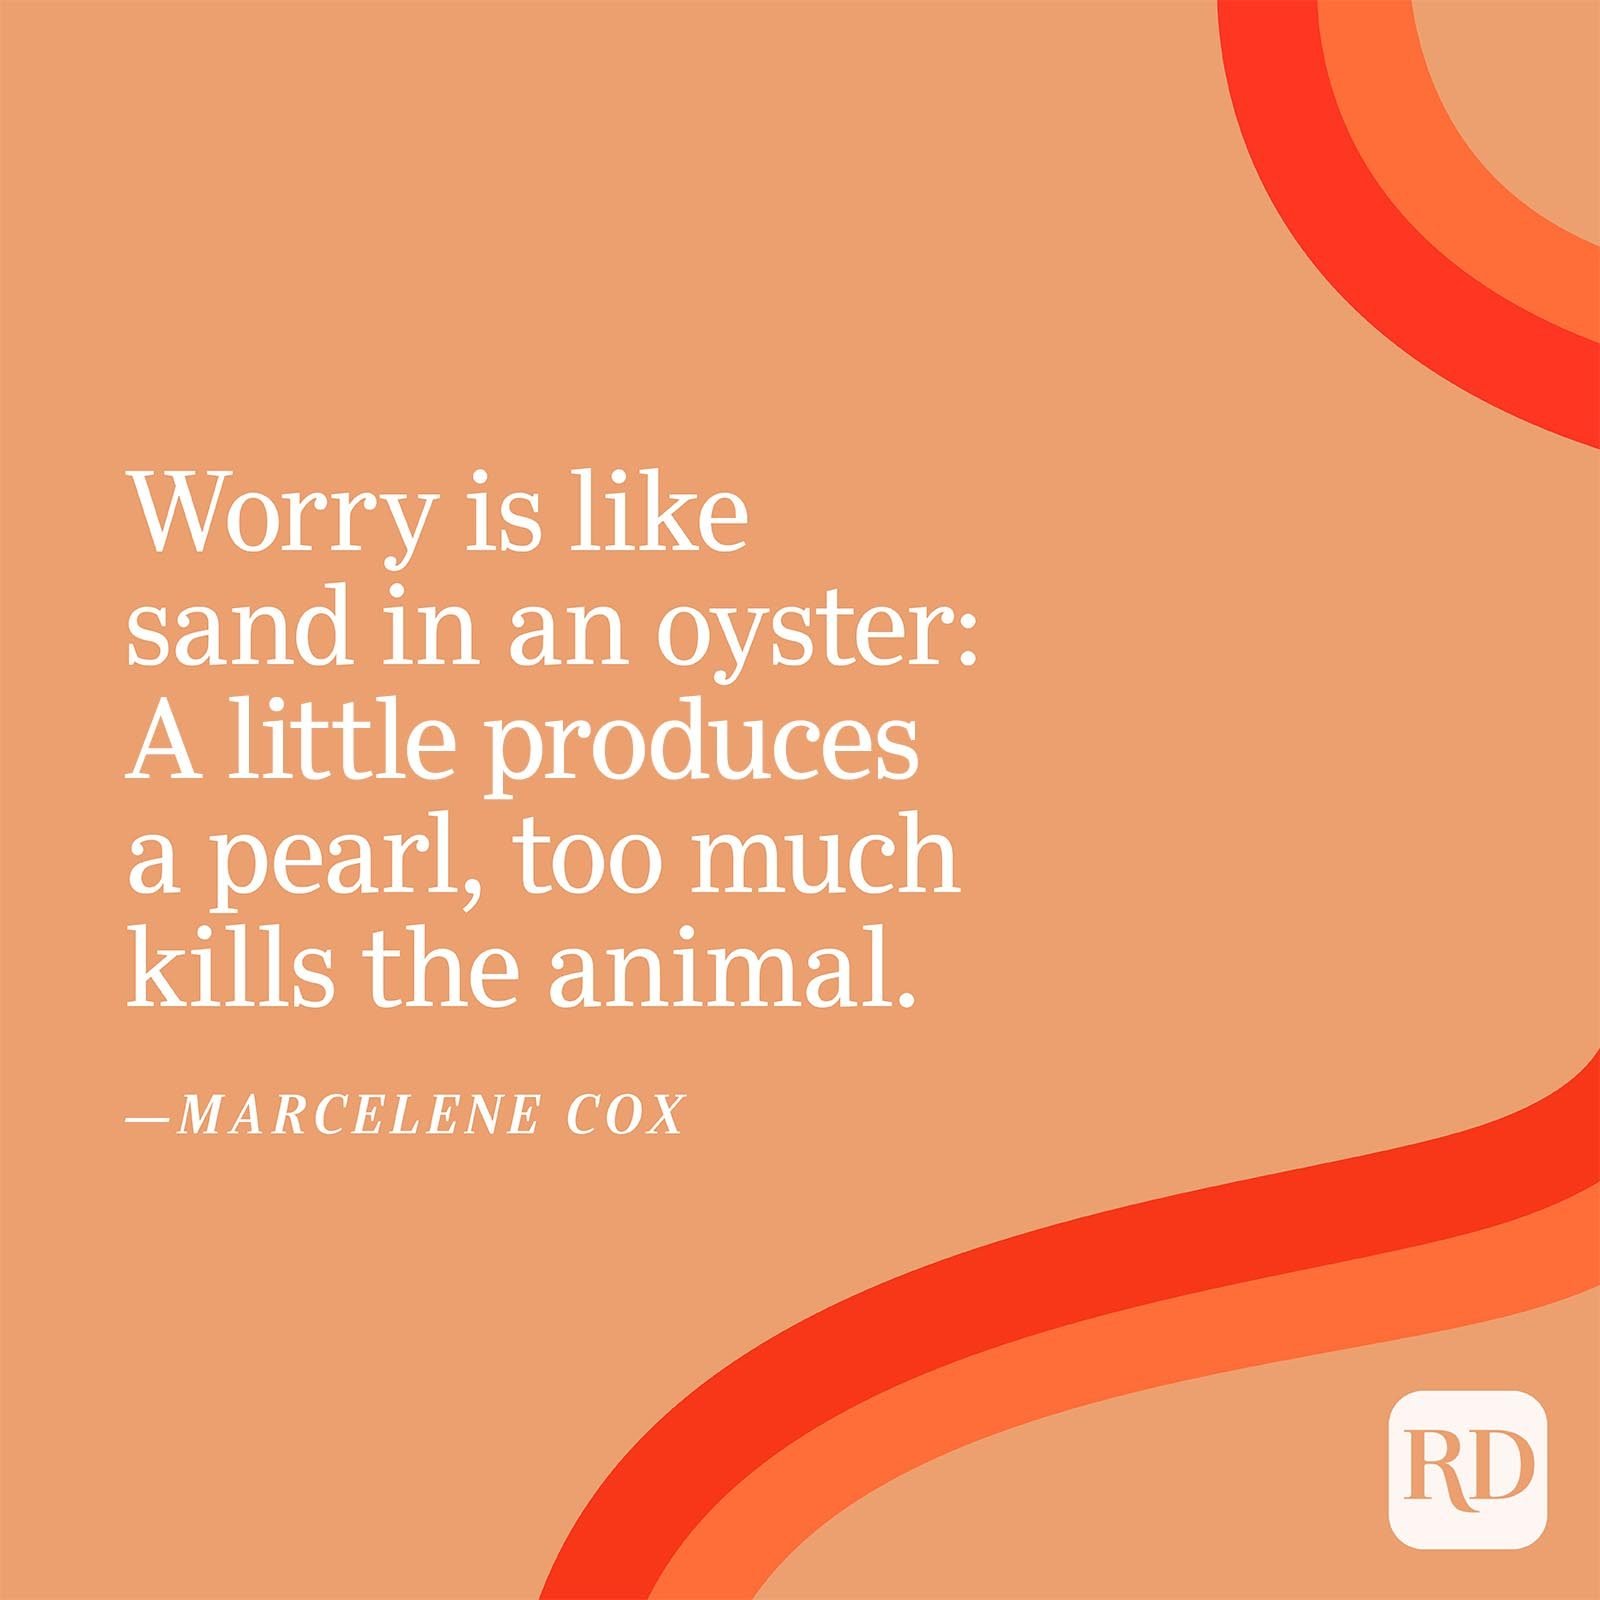 "Worry is like sand in an oyster: A little produces a pearl, too much kills the animal." —Marcelene Cox